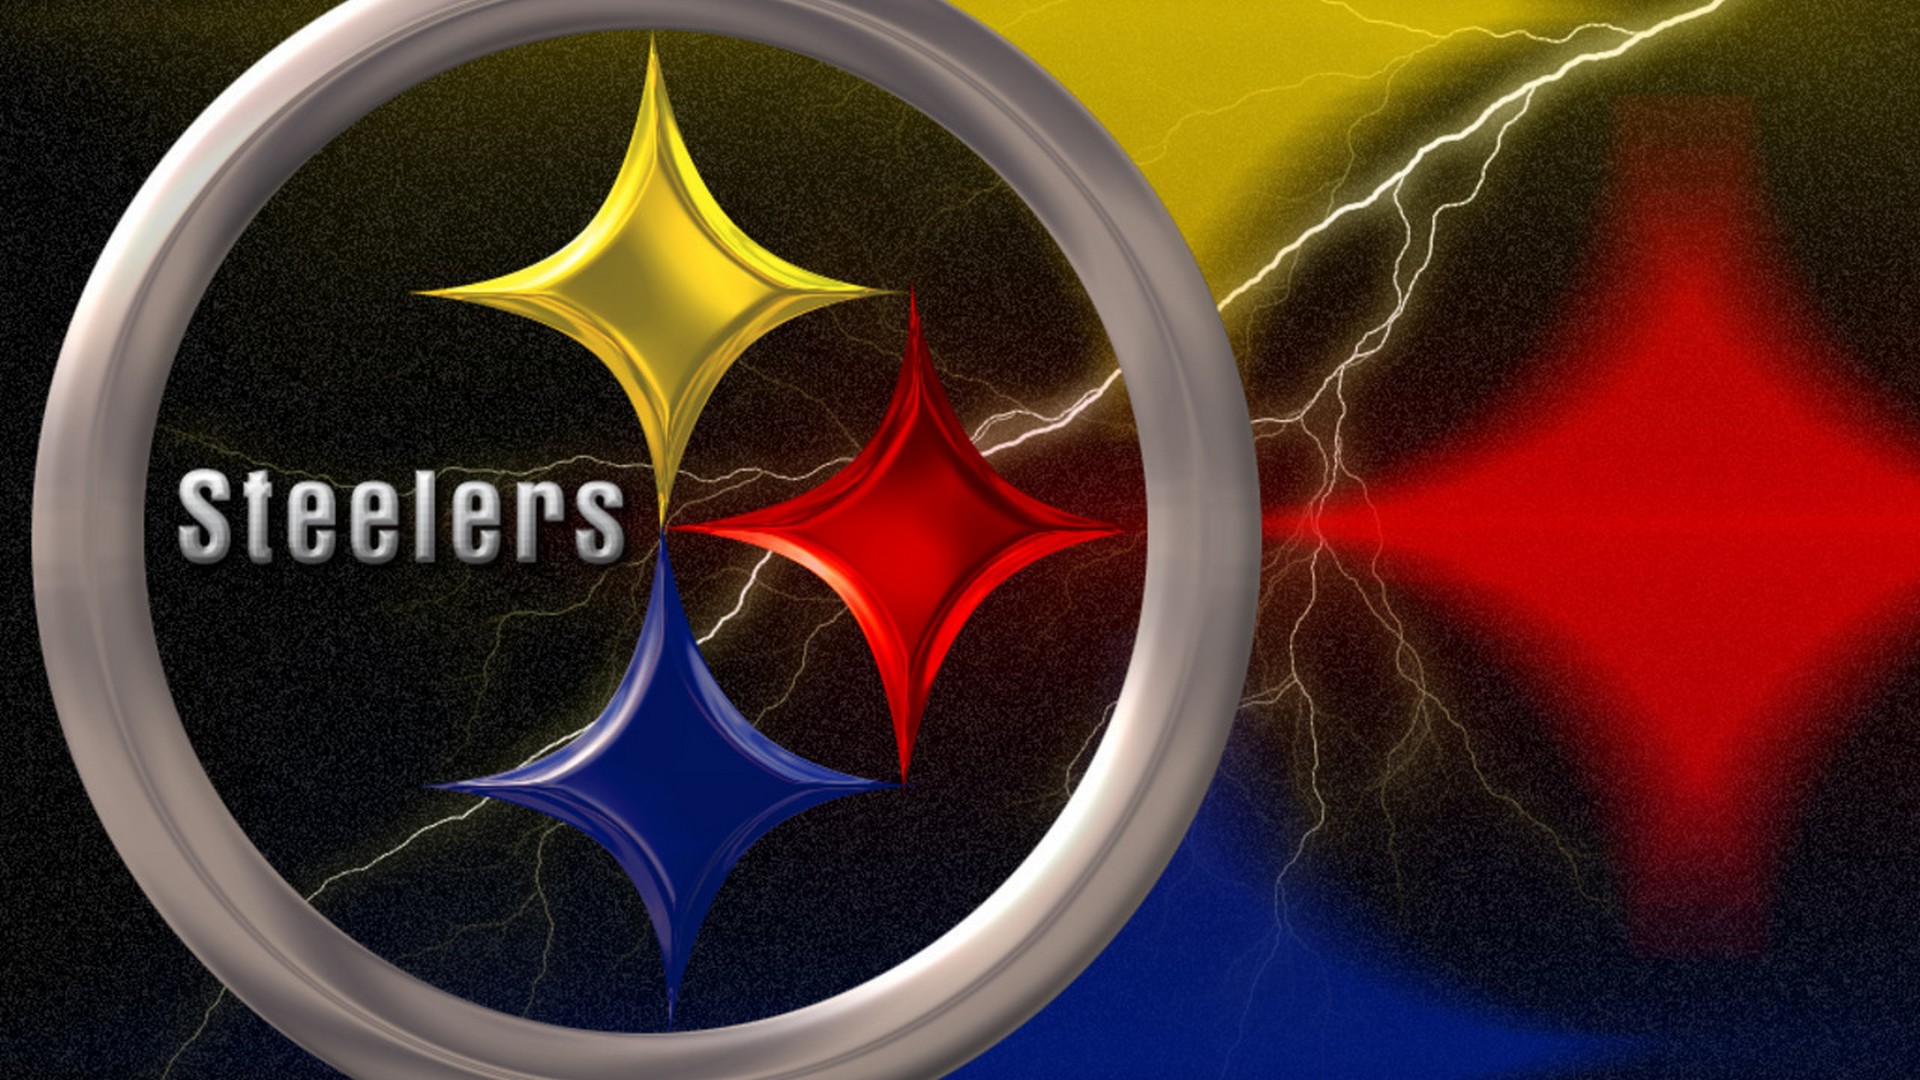 Windows Wallpaper Steelers Football With Resolution 1920X1080 pixel. You can make this wallpaper for your Mac or Windows Desktop Background, iPhone, Android or Tablet and another Smartphone device for free